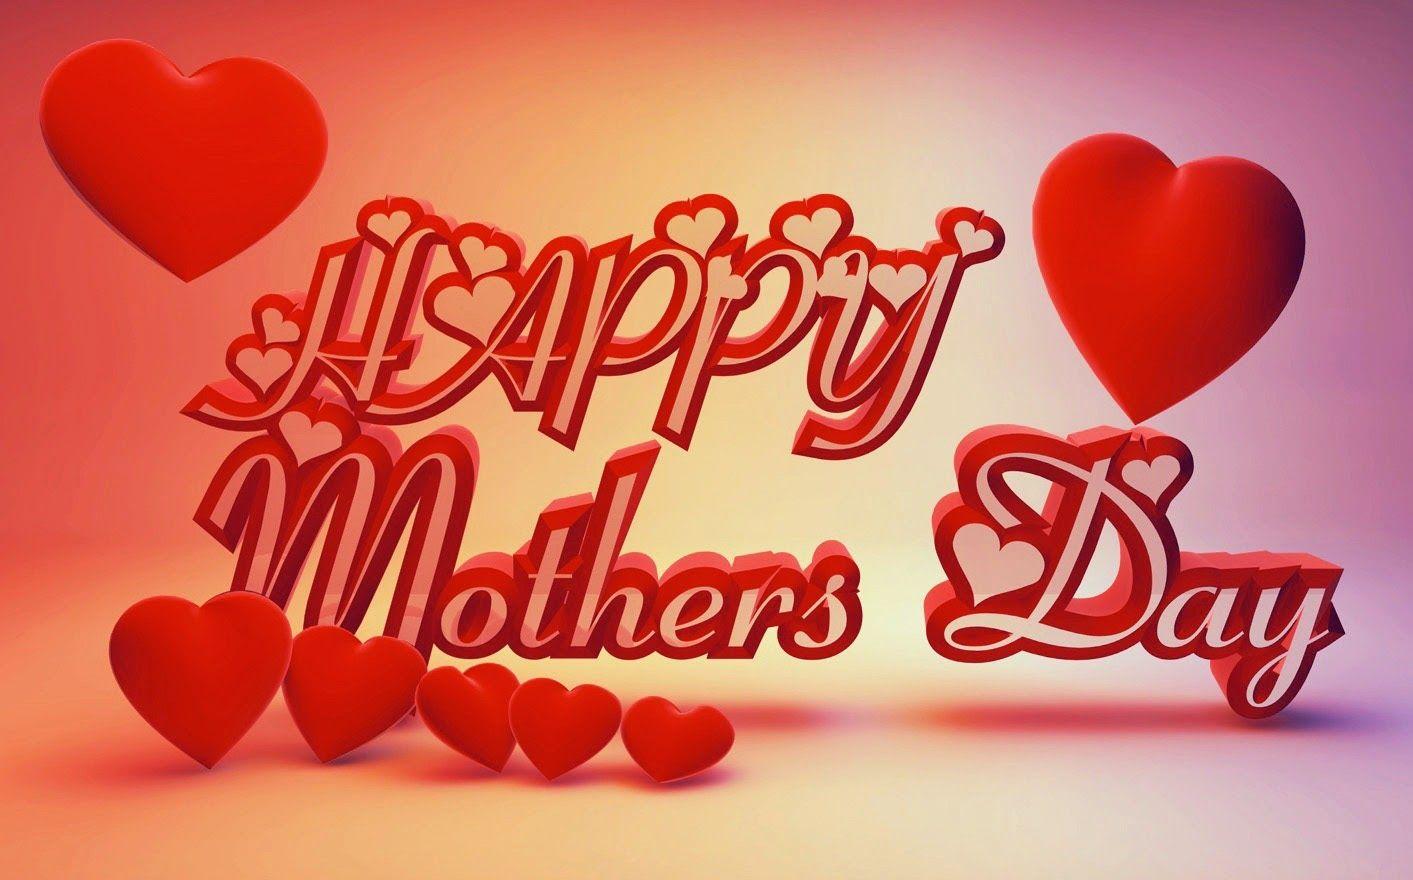 Mothers Day What's app Status HD Image and Wallpaper